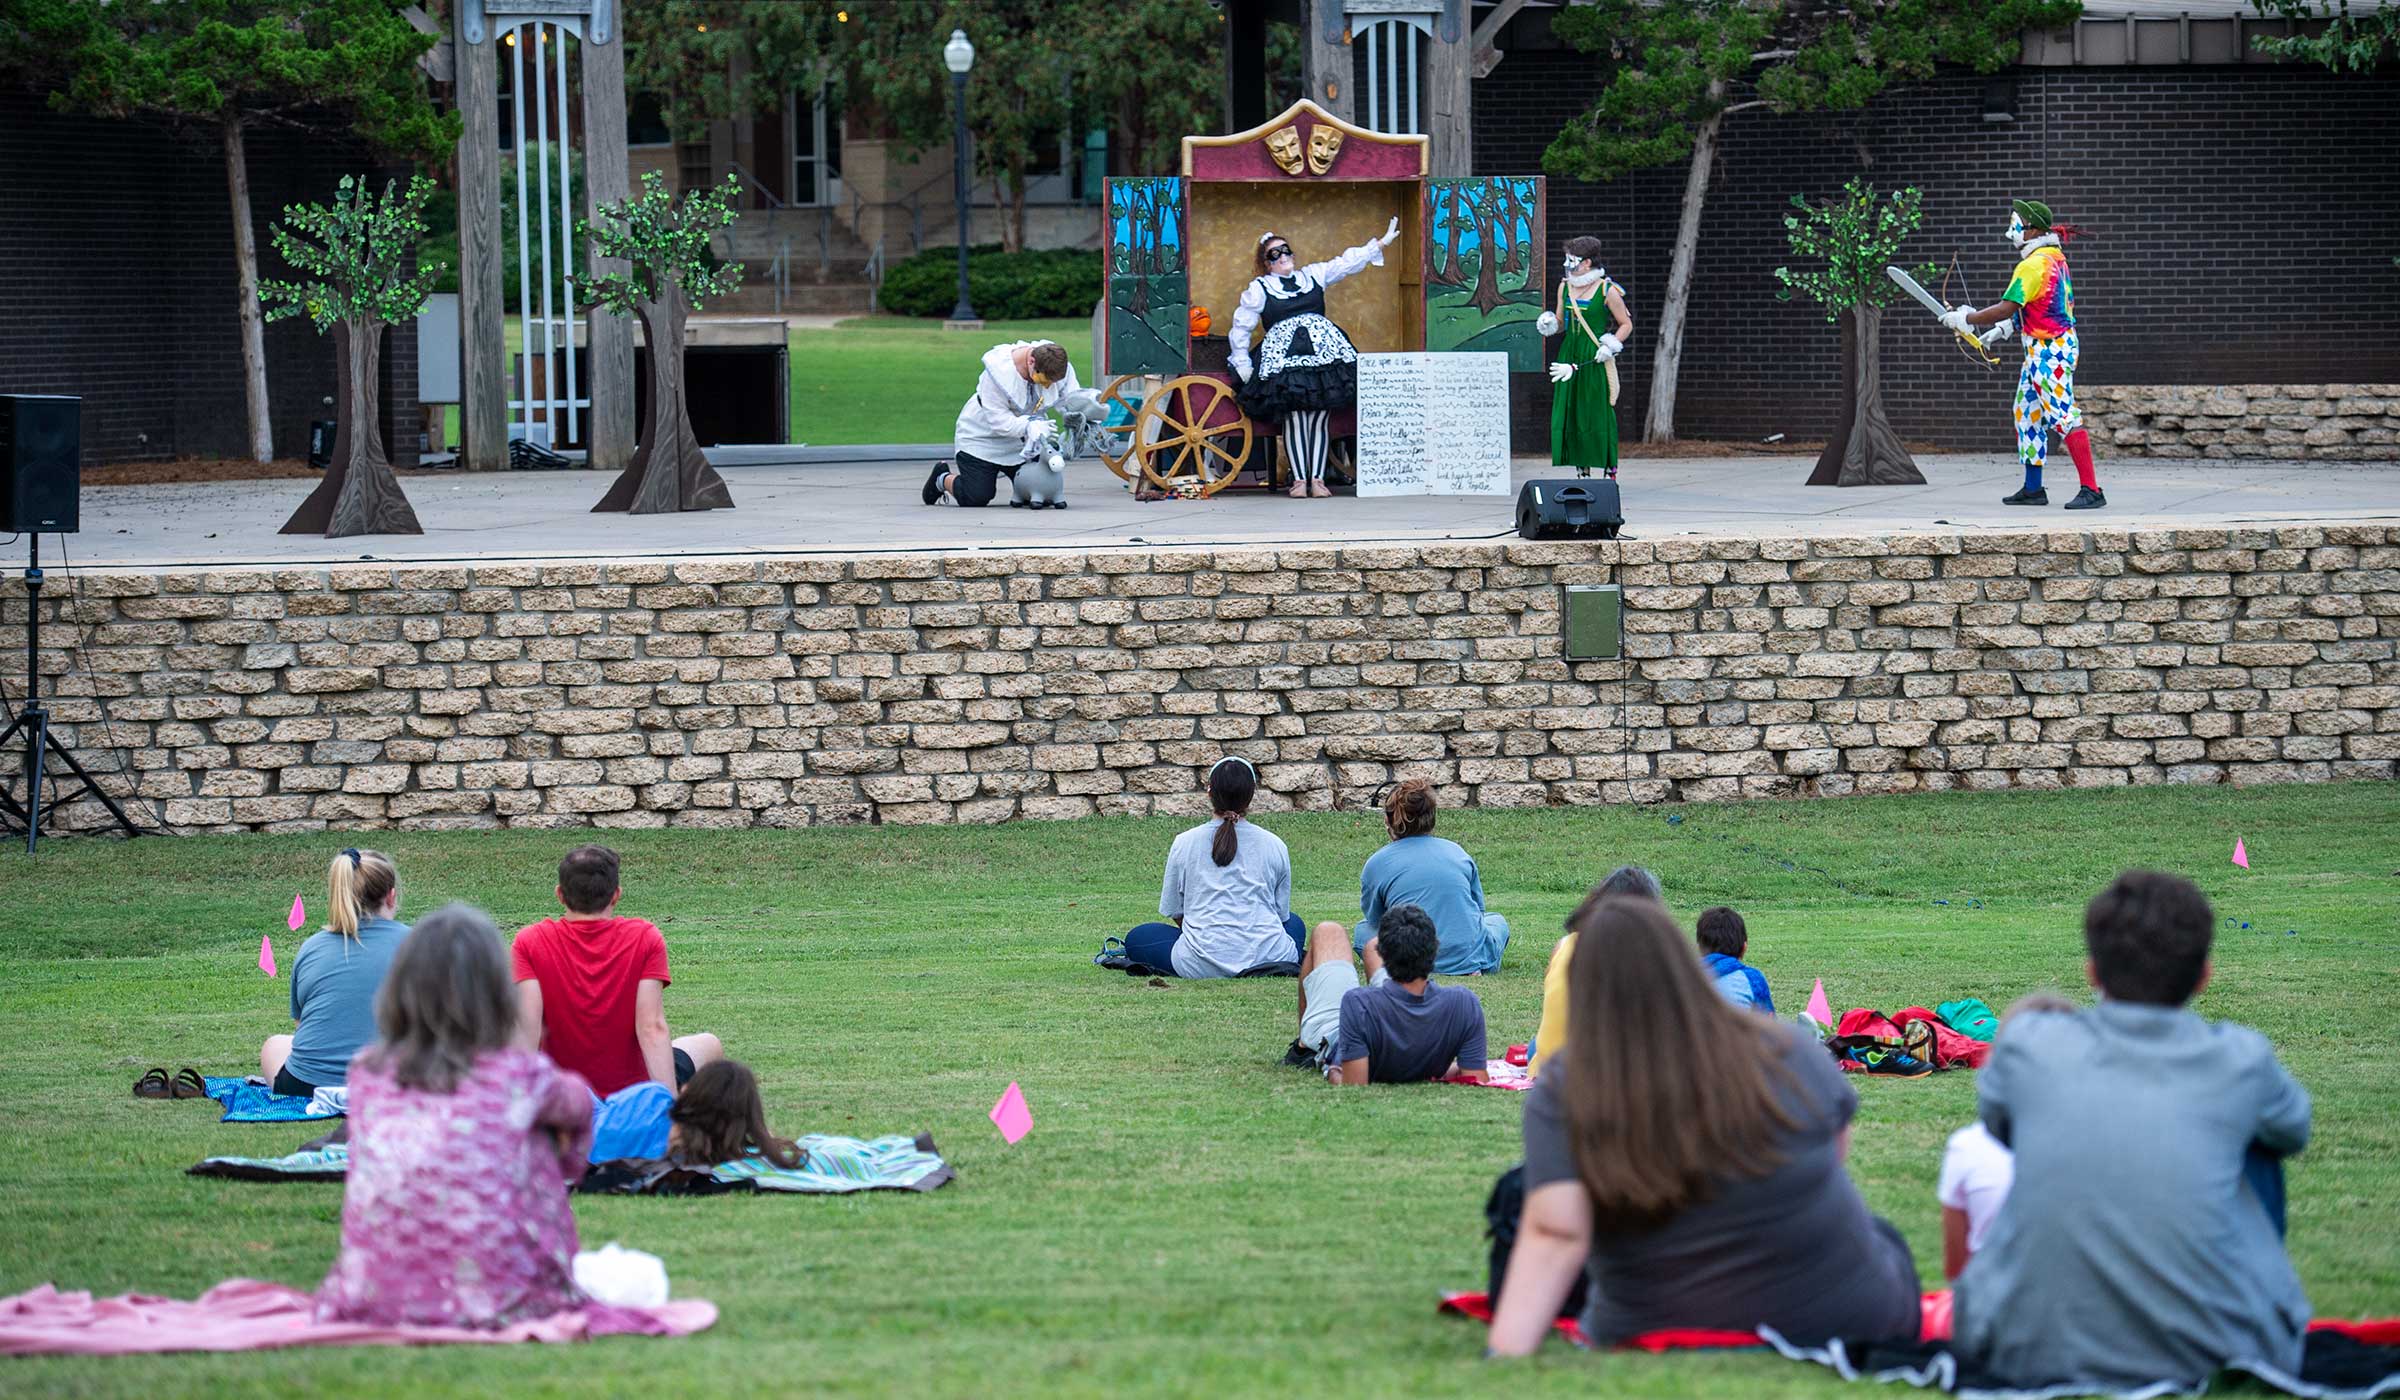 With an audience spread out upon the grass of the outdoor Amphitheater in the foreground, four MSU Theatre actors play the masked characters of Commedia Robin Hood.